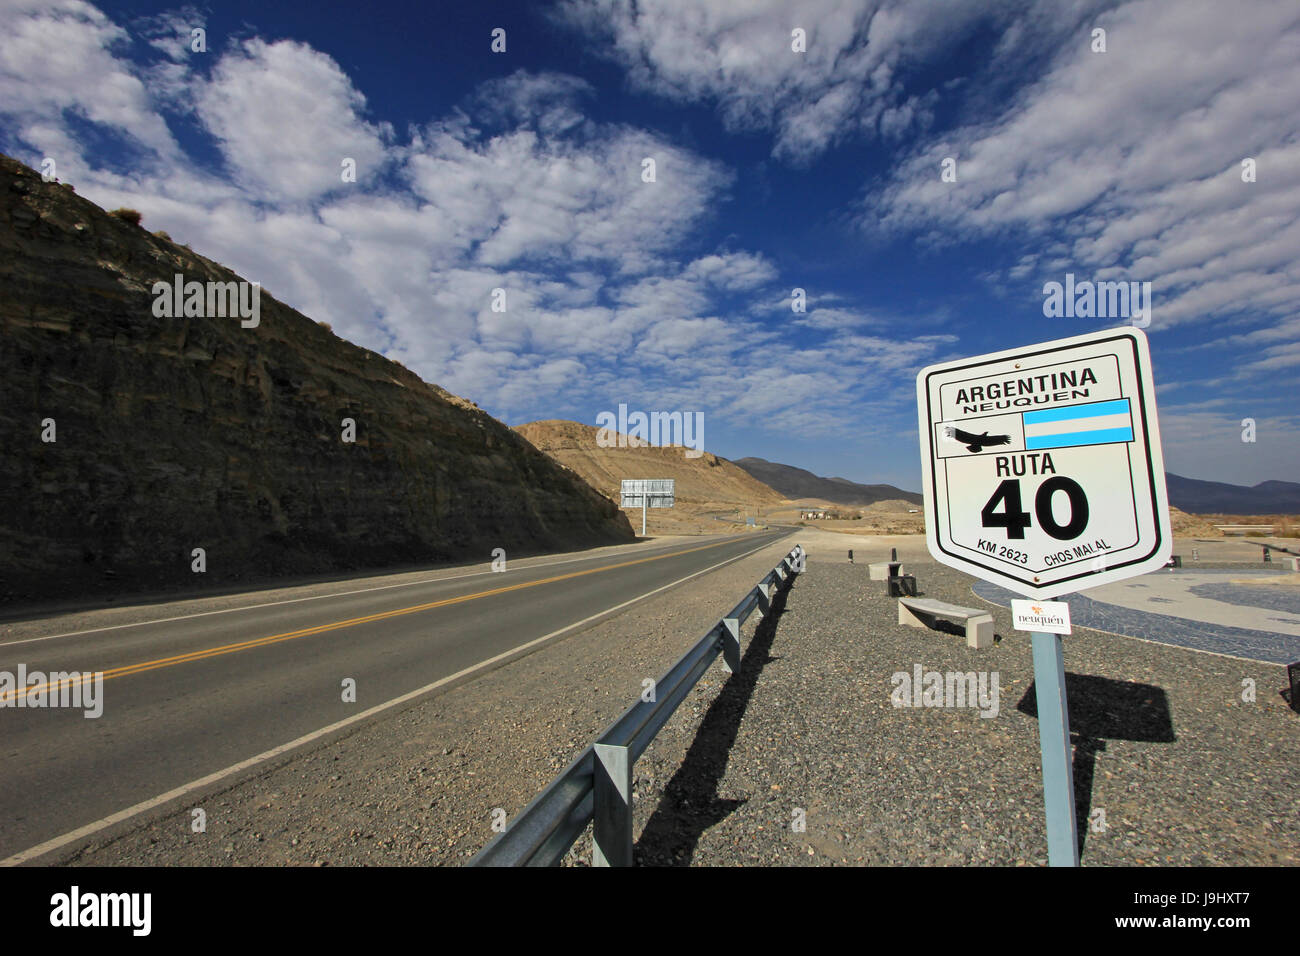 Road sign in the middle of ruta route 40, Patagonia, Argentina Stock Photo  - Alamy